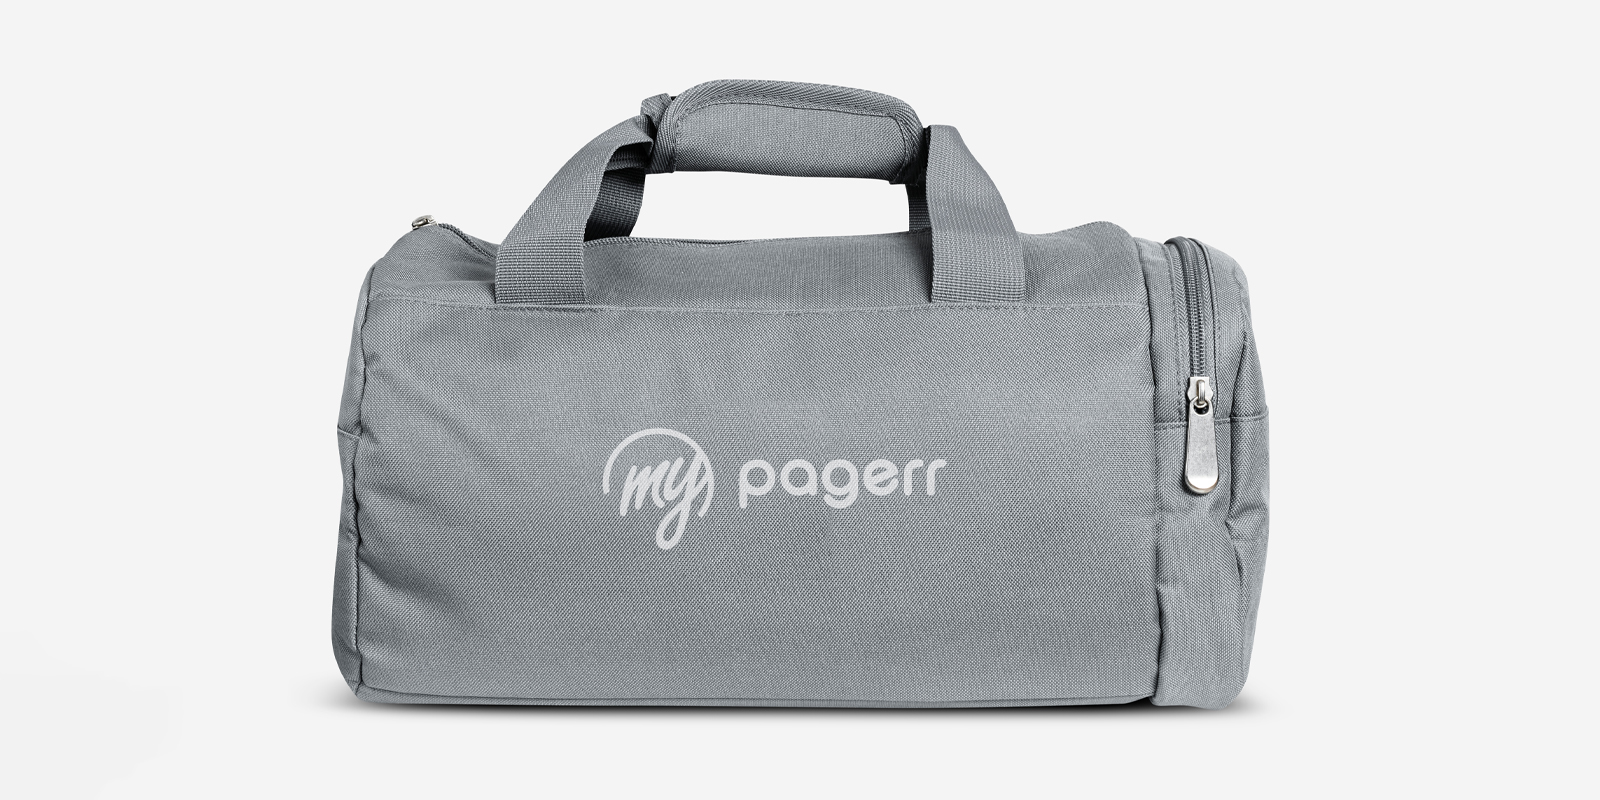 Duffel & gym bags in Berlin - Print with Pagerr